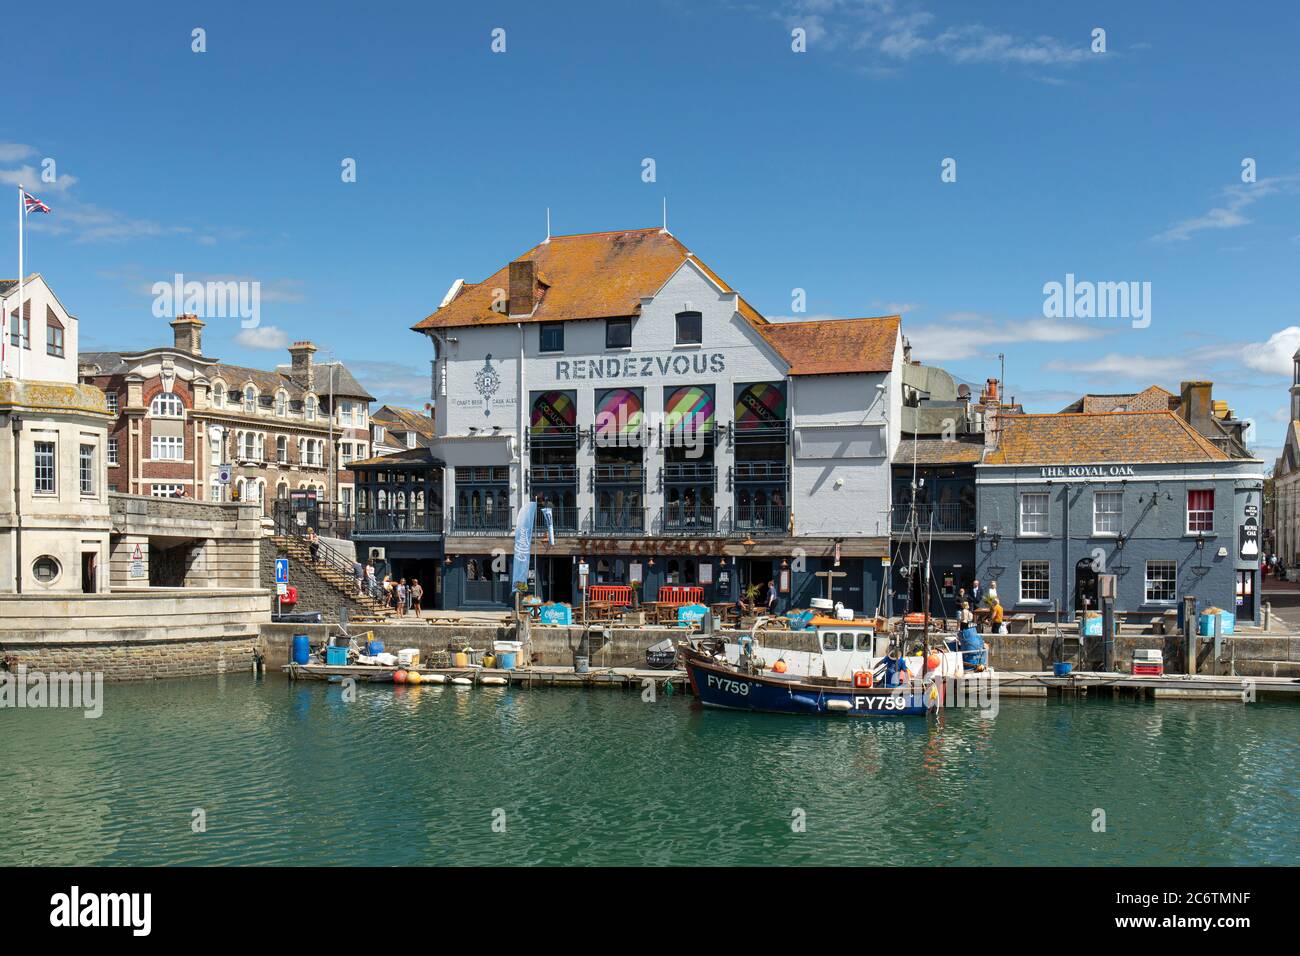 Rendezvous & The Royal Oak at the historic picturesque harbour in Weymouth, Dorset, England UK Stock Photo